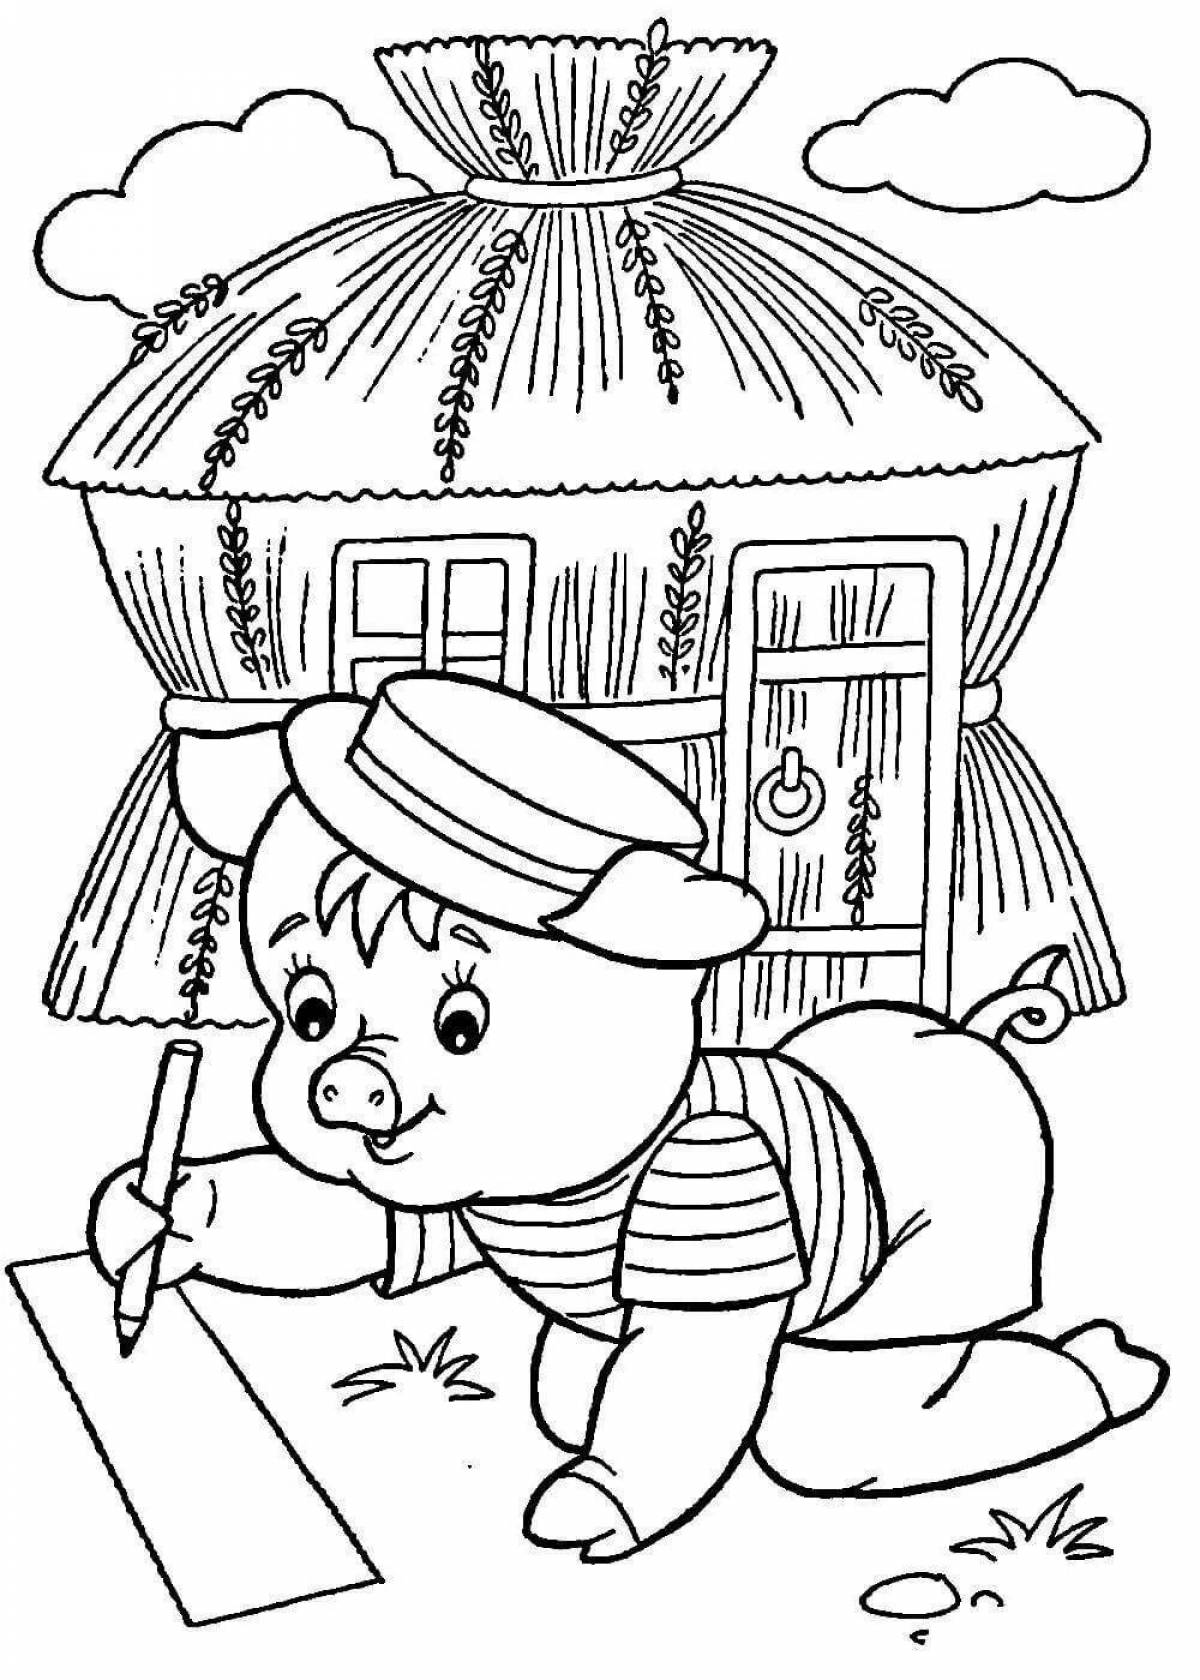 The three little pigs coloring book for little ones